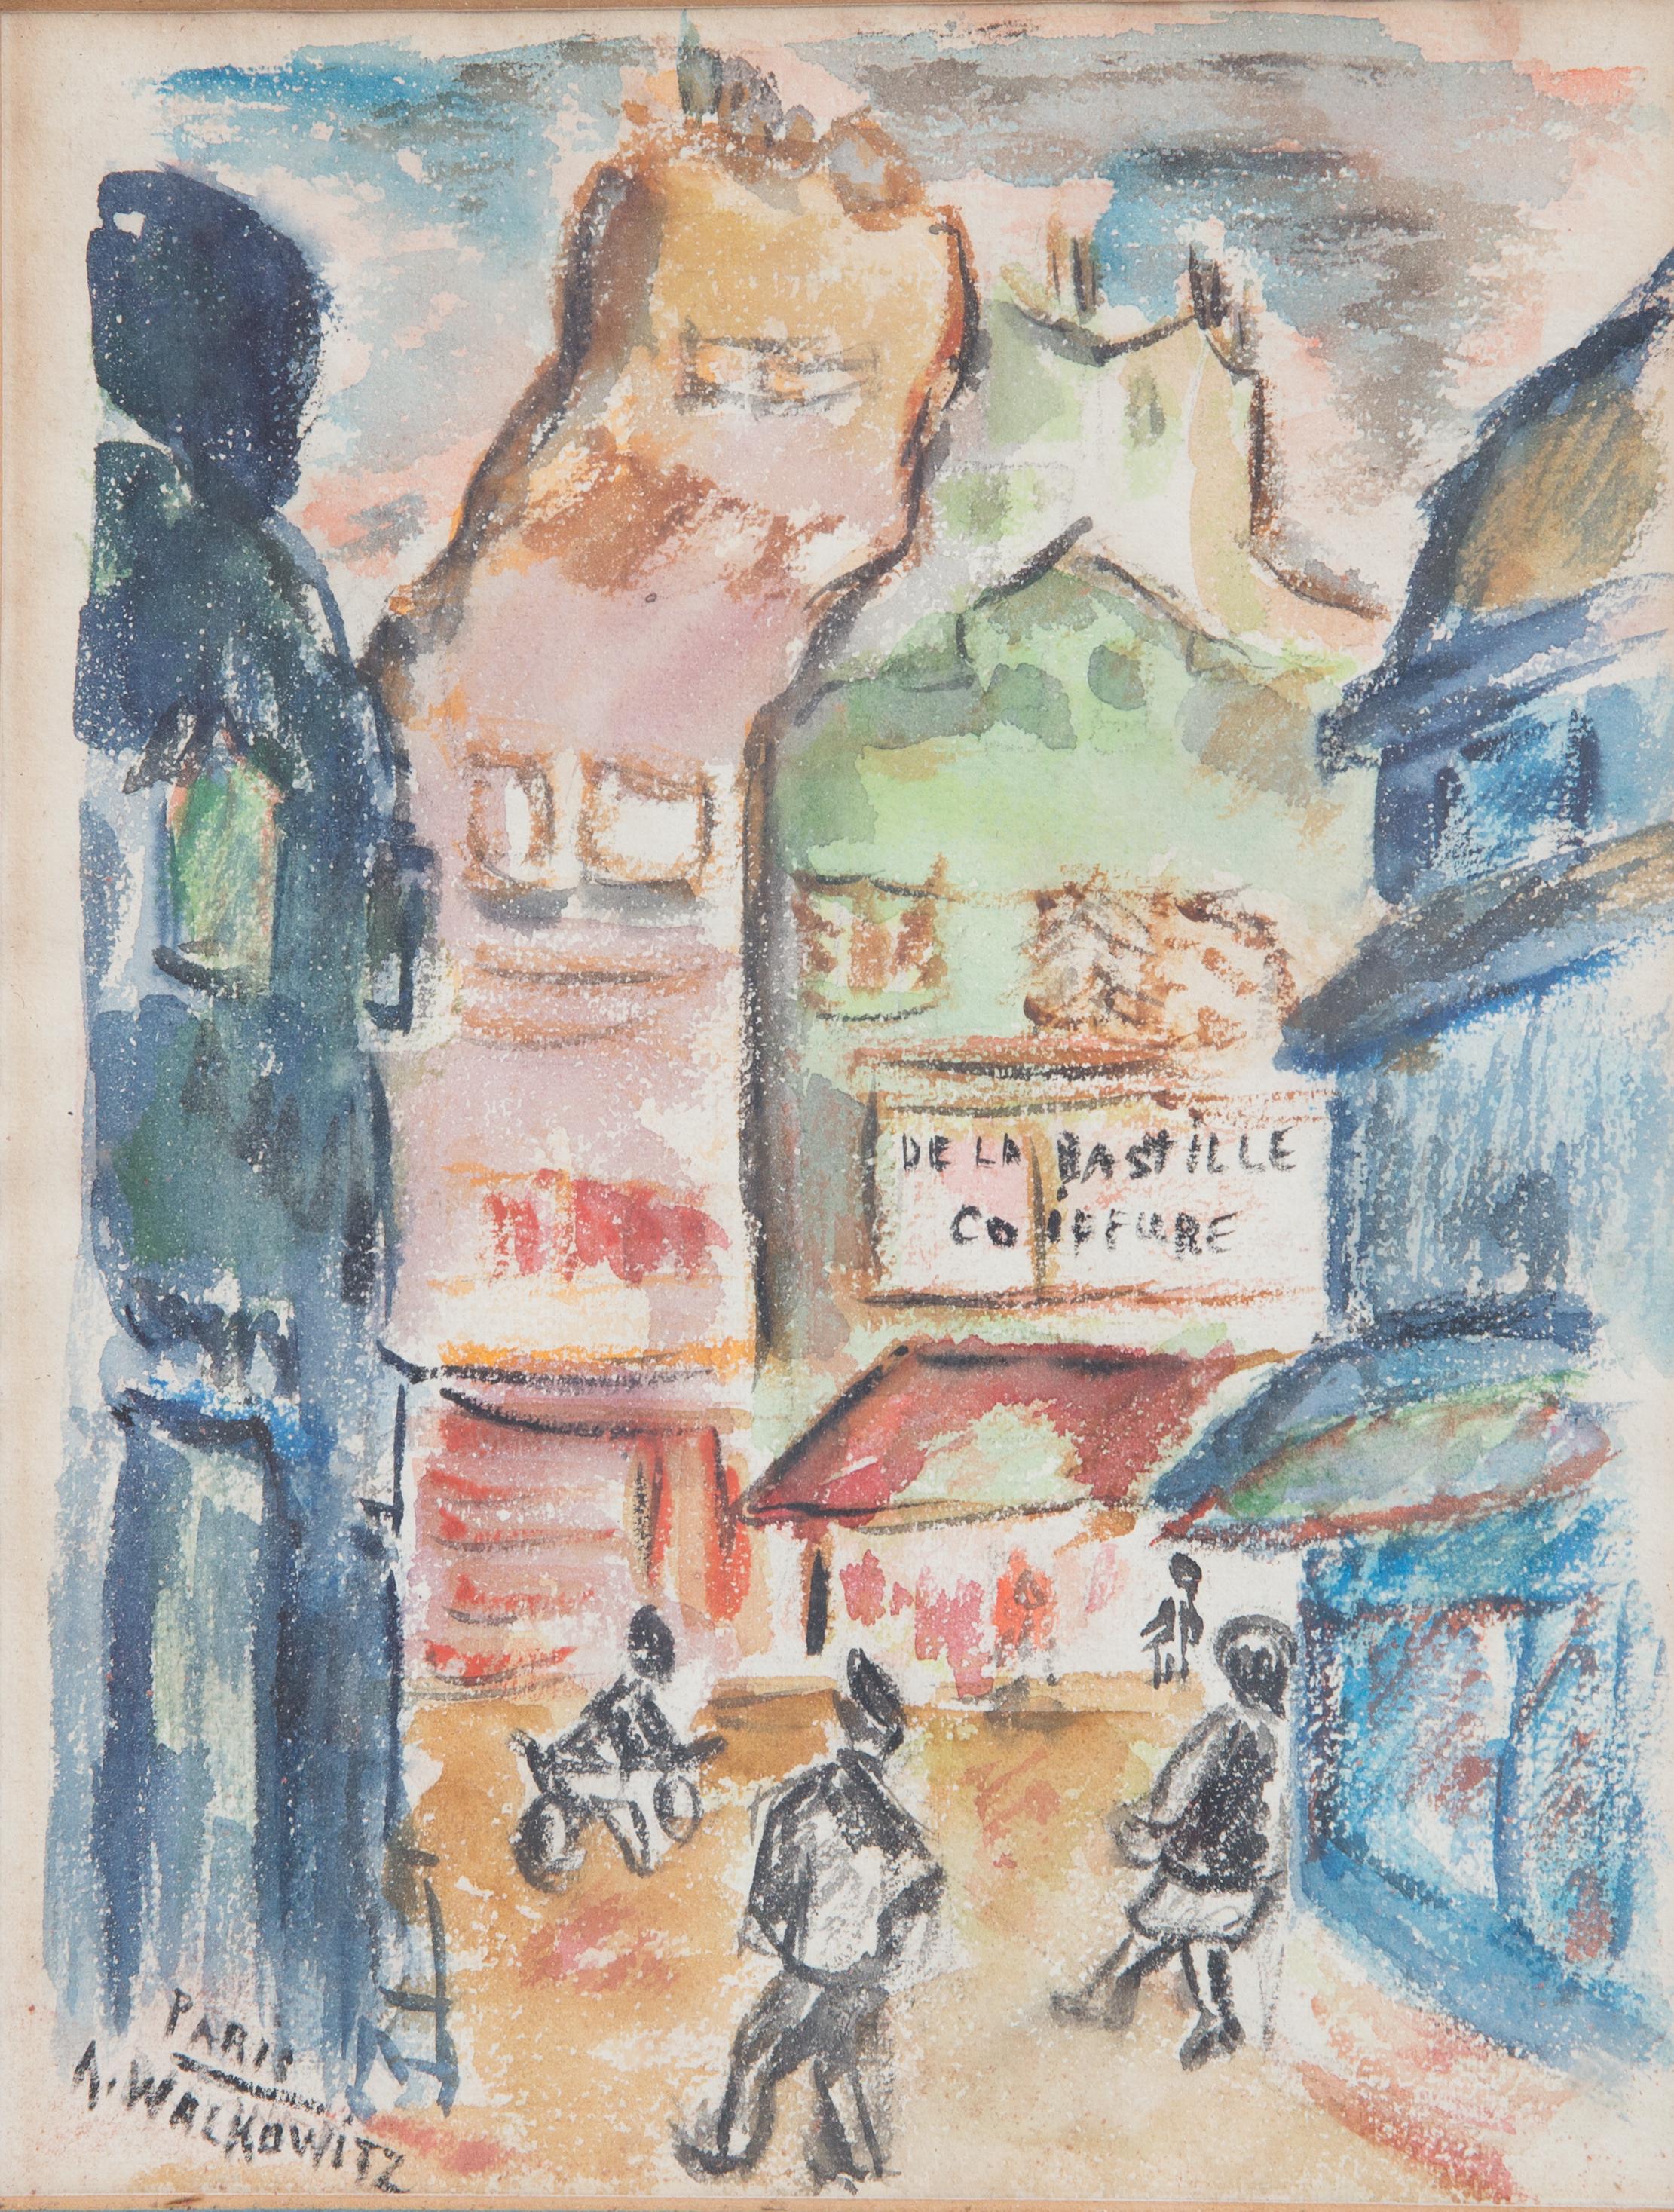 Offered is an original signed Abraham modernist watercolor depicting a stylized Paris street scene, dating from the early 20th century. Walkowitz was an American painter grouped in with early American Modernists working in the Modernist style.